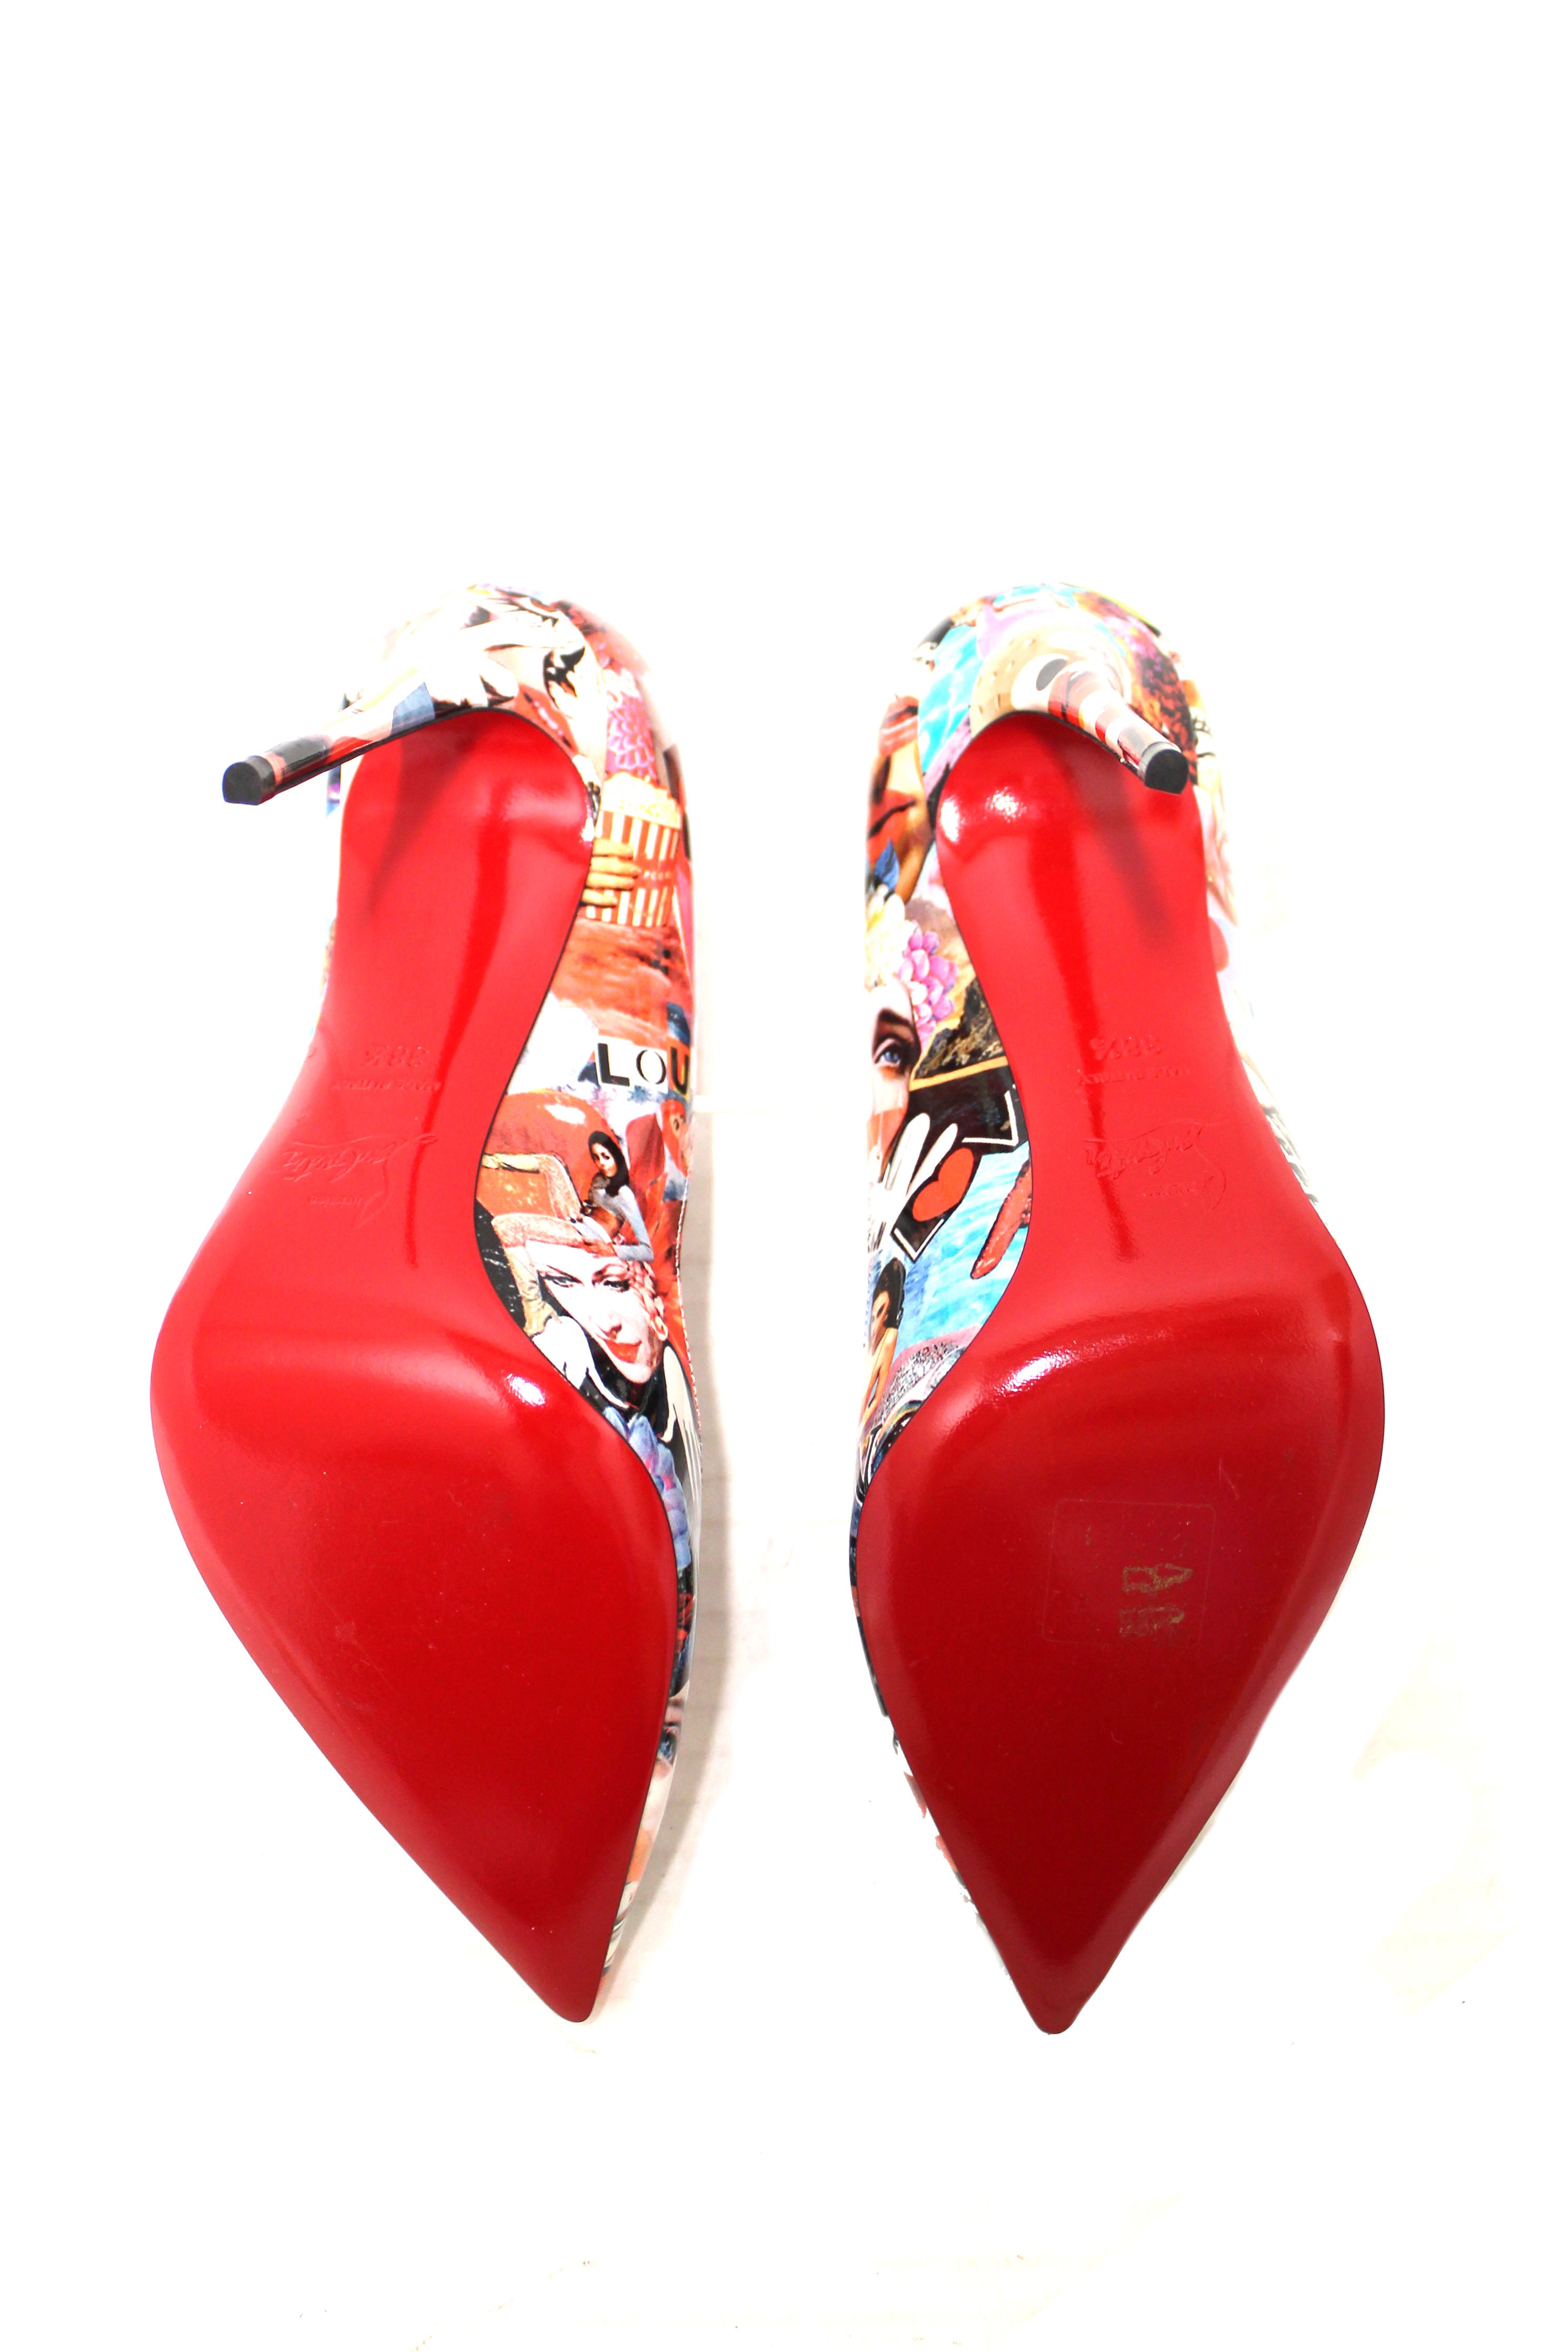 Authentic Christian Hot Chick Collage Print Patent Leather Pumps Size 38.5